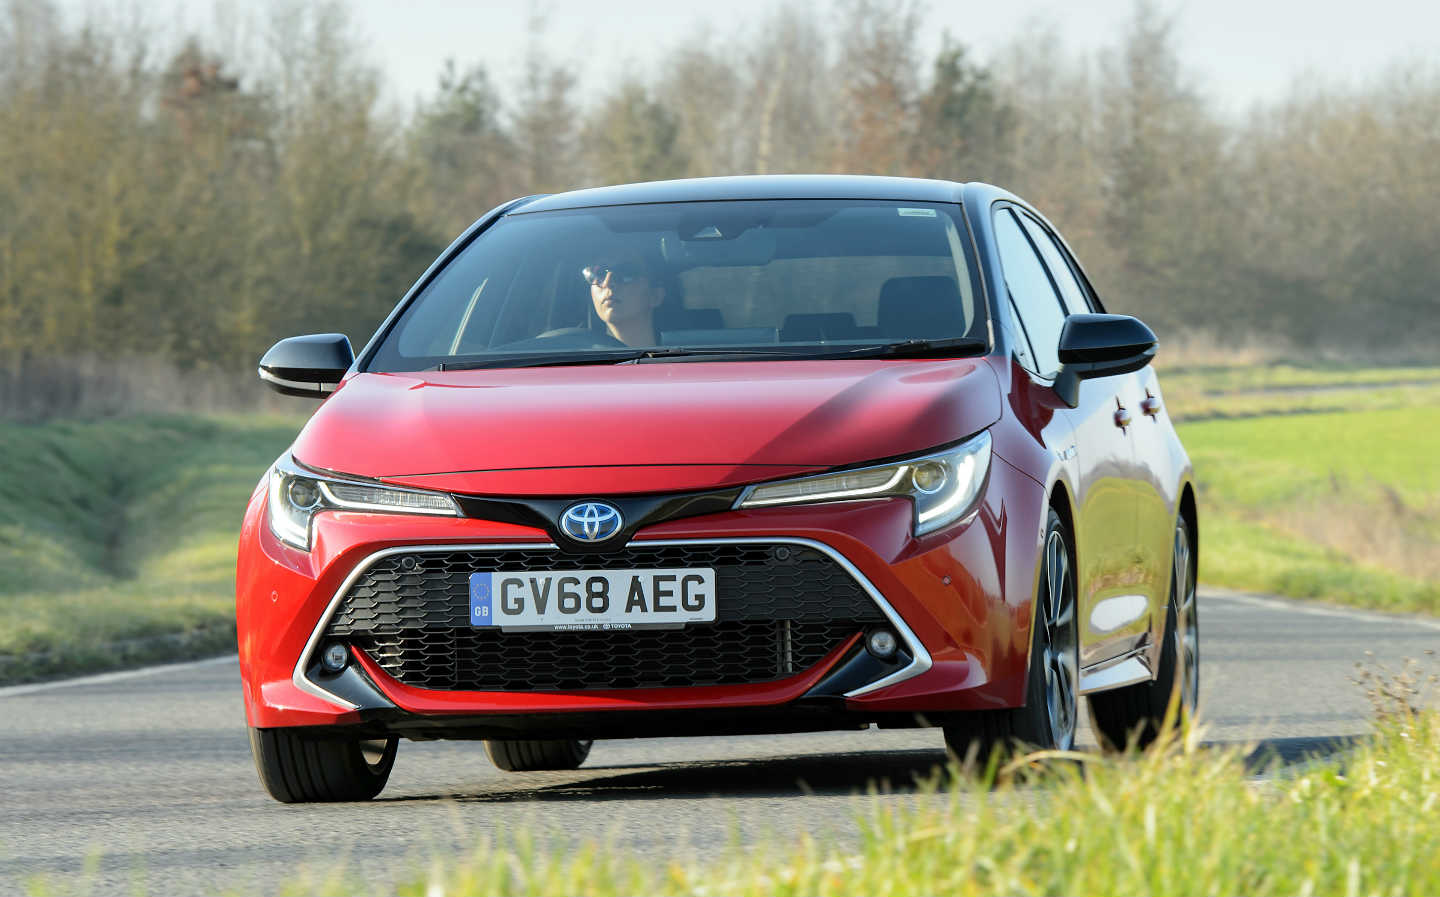 Buying Guide: Best 0% APR finance deals on new cars in 2019